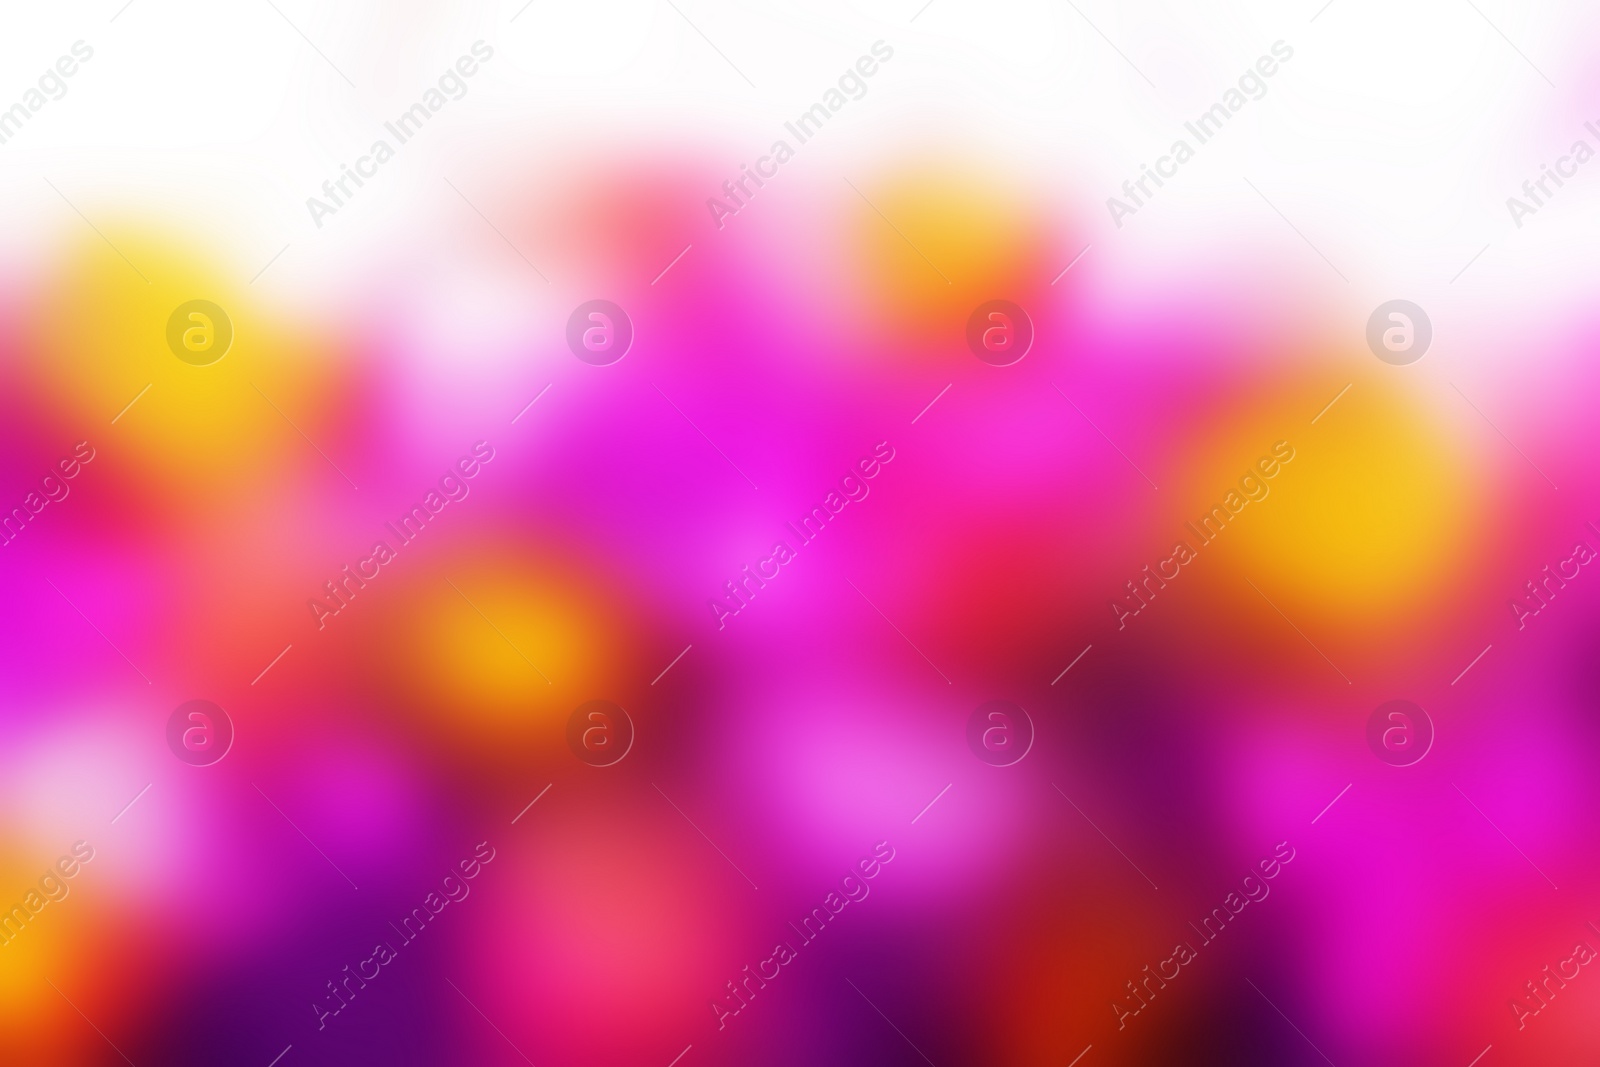 Image of Blurred view of abstract bright background. Bokeh effect